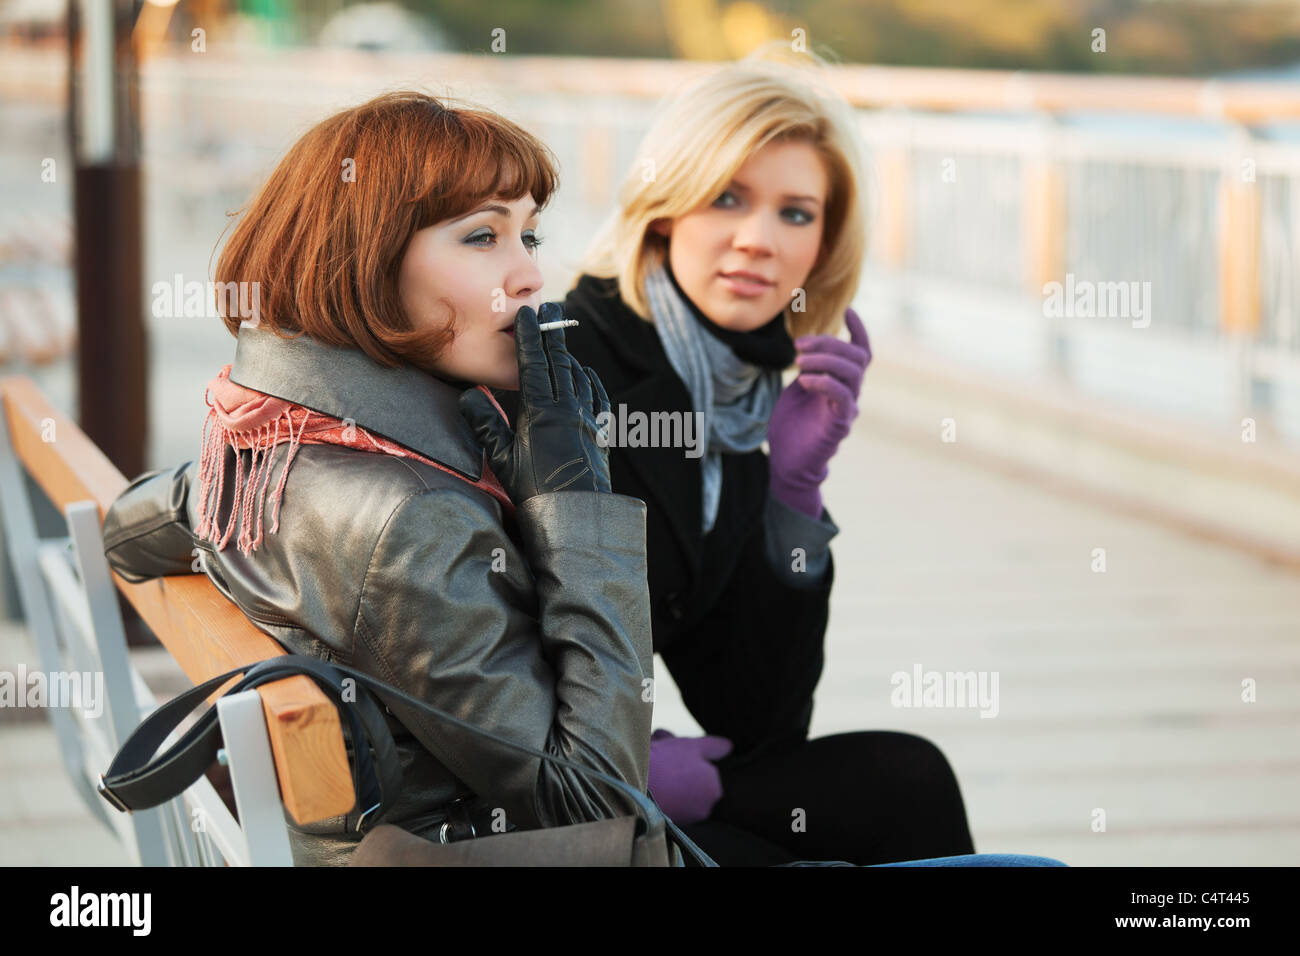 Two young women sitting on a bench Stock Photo